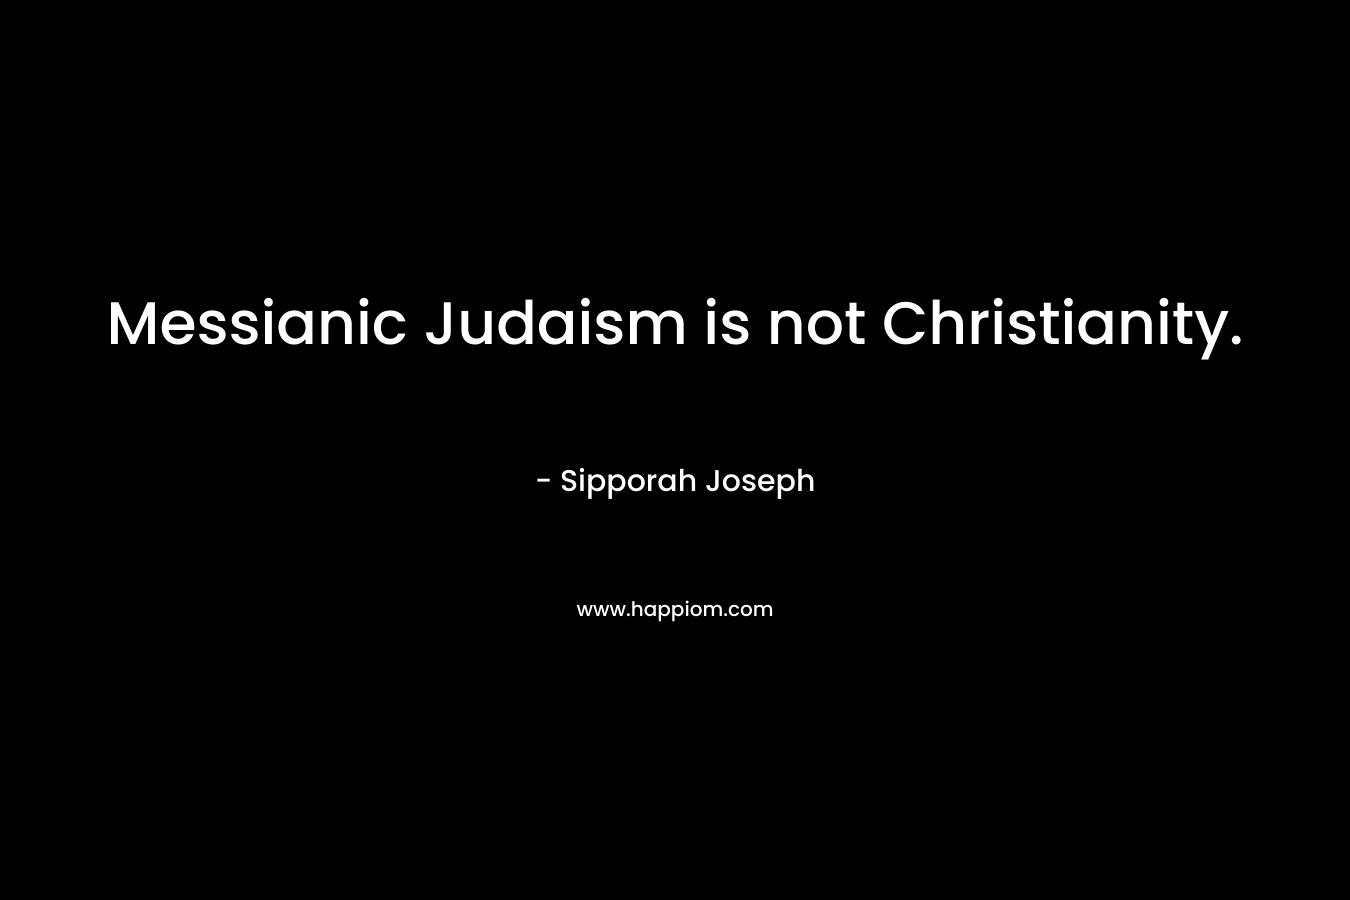 Messianic Judaism is not Christianity.